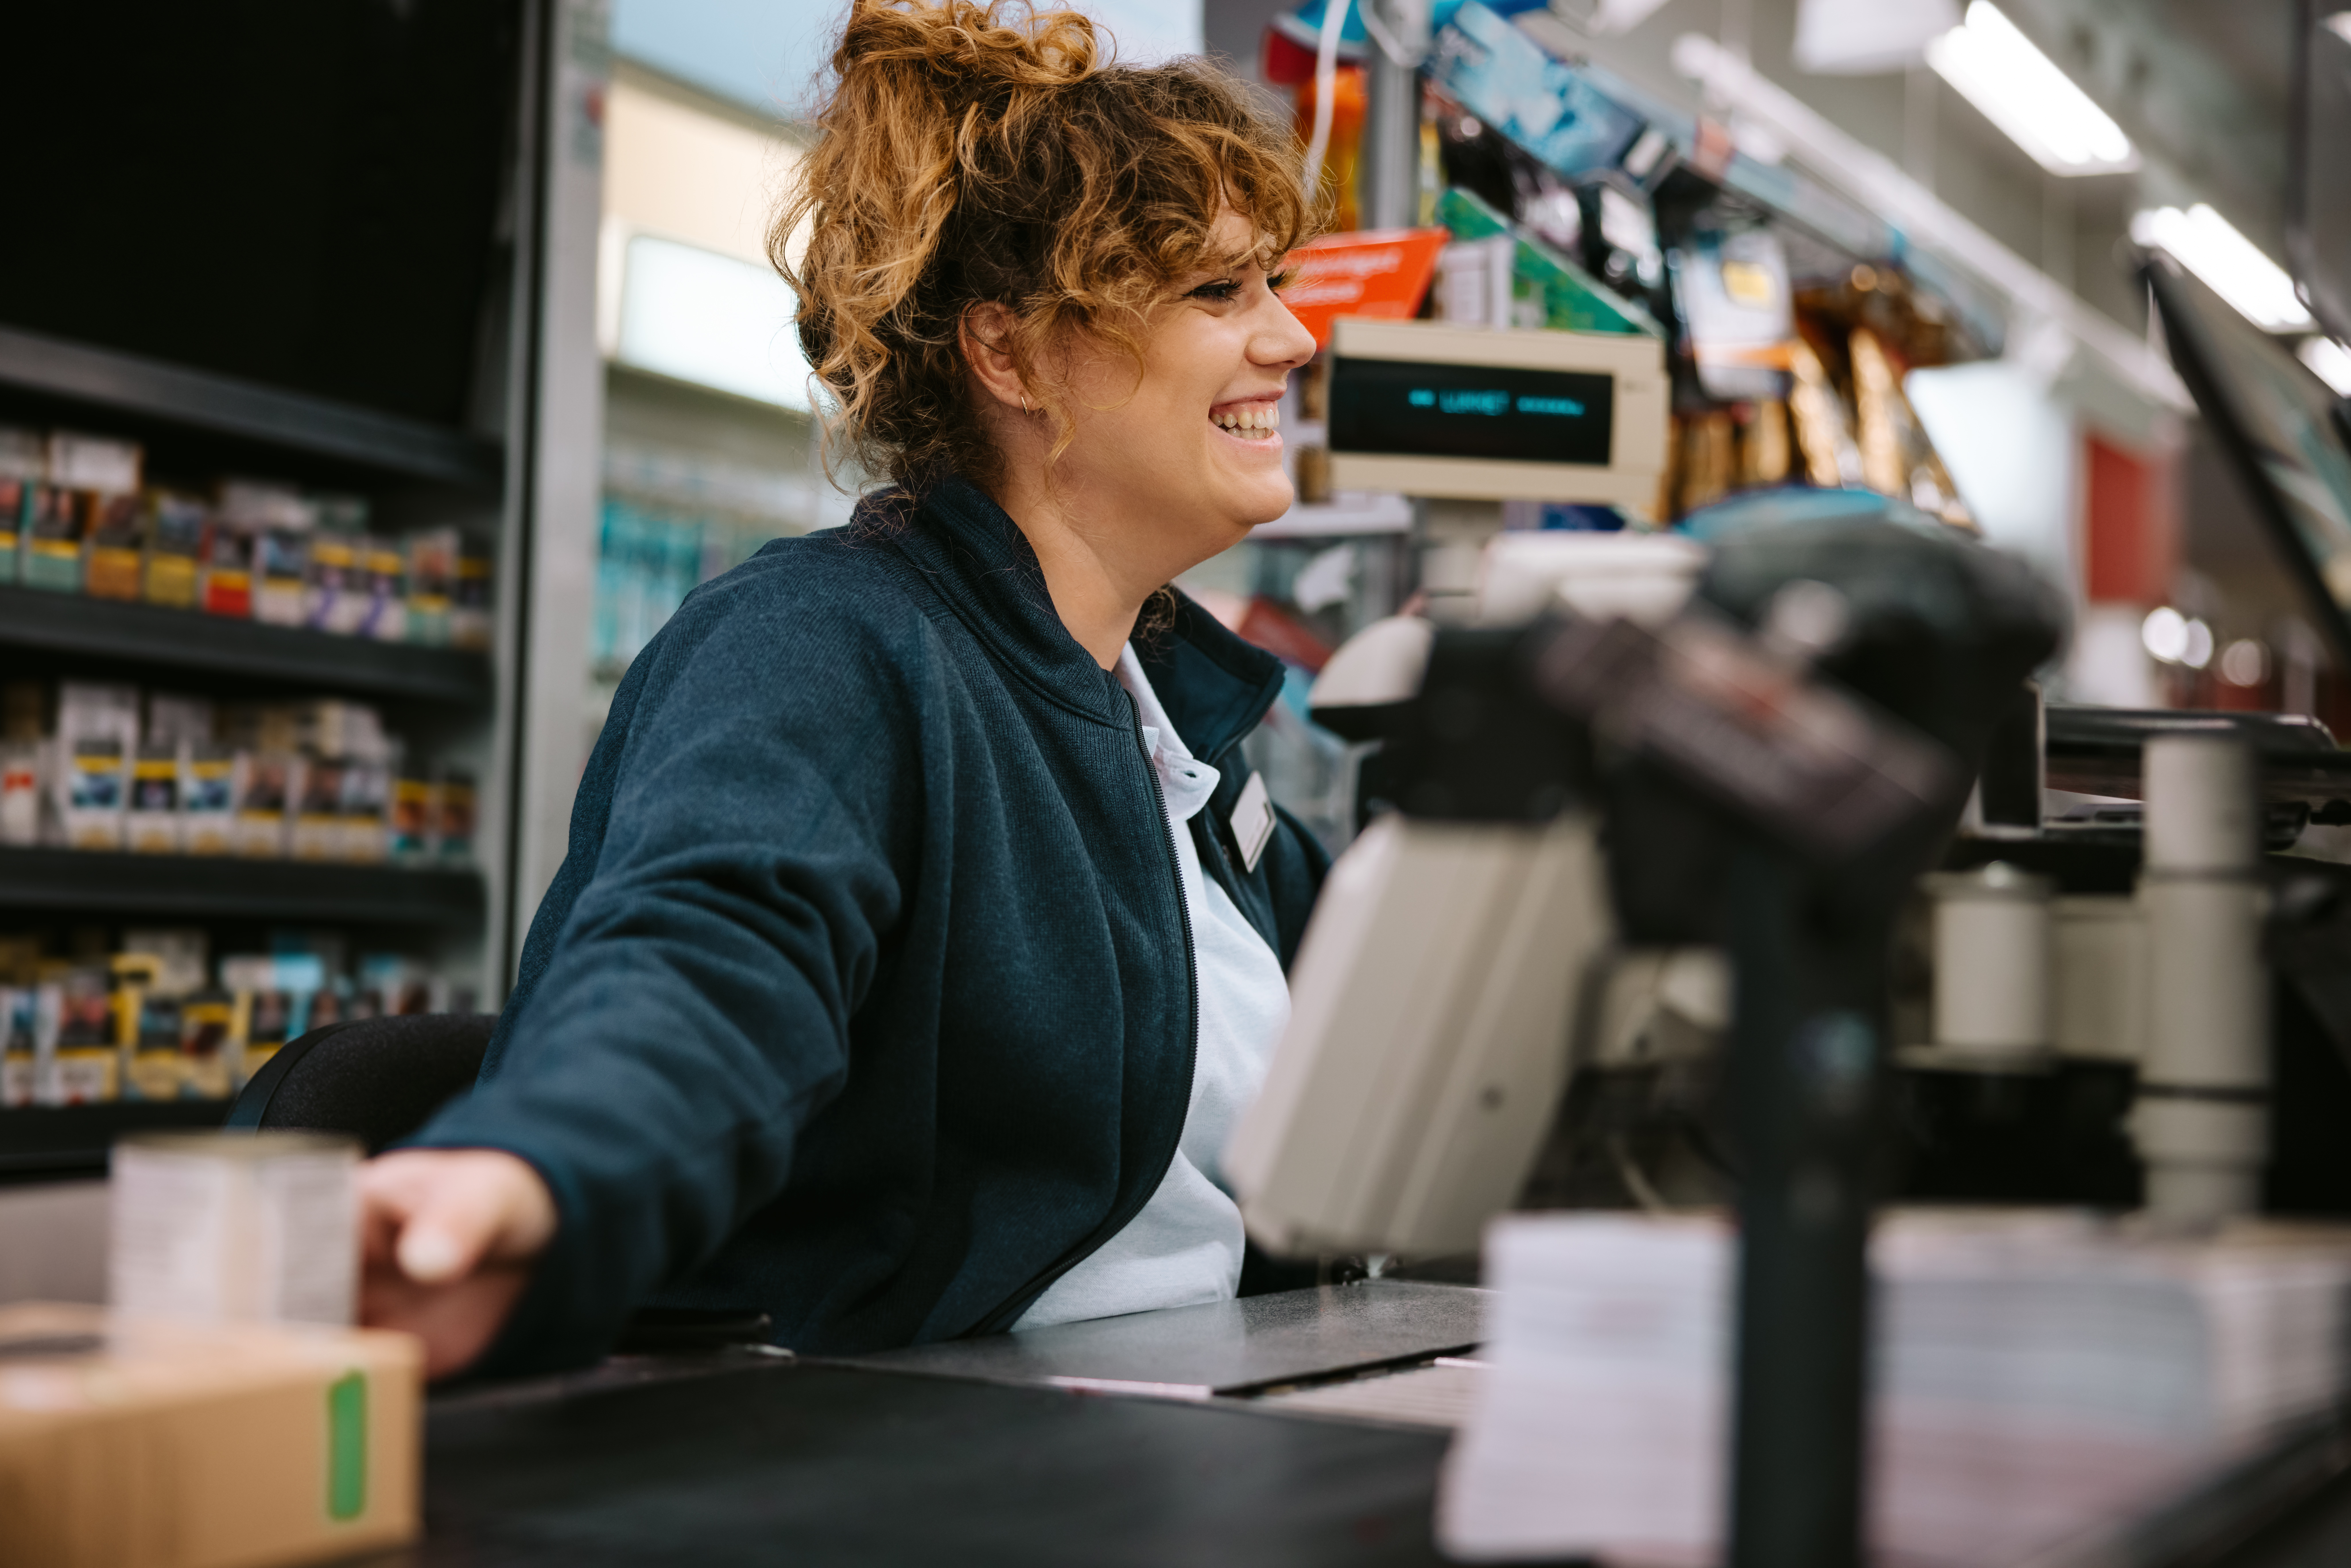 A woman working at a checkout counter | Source: Shutterstock